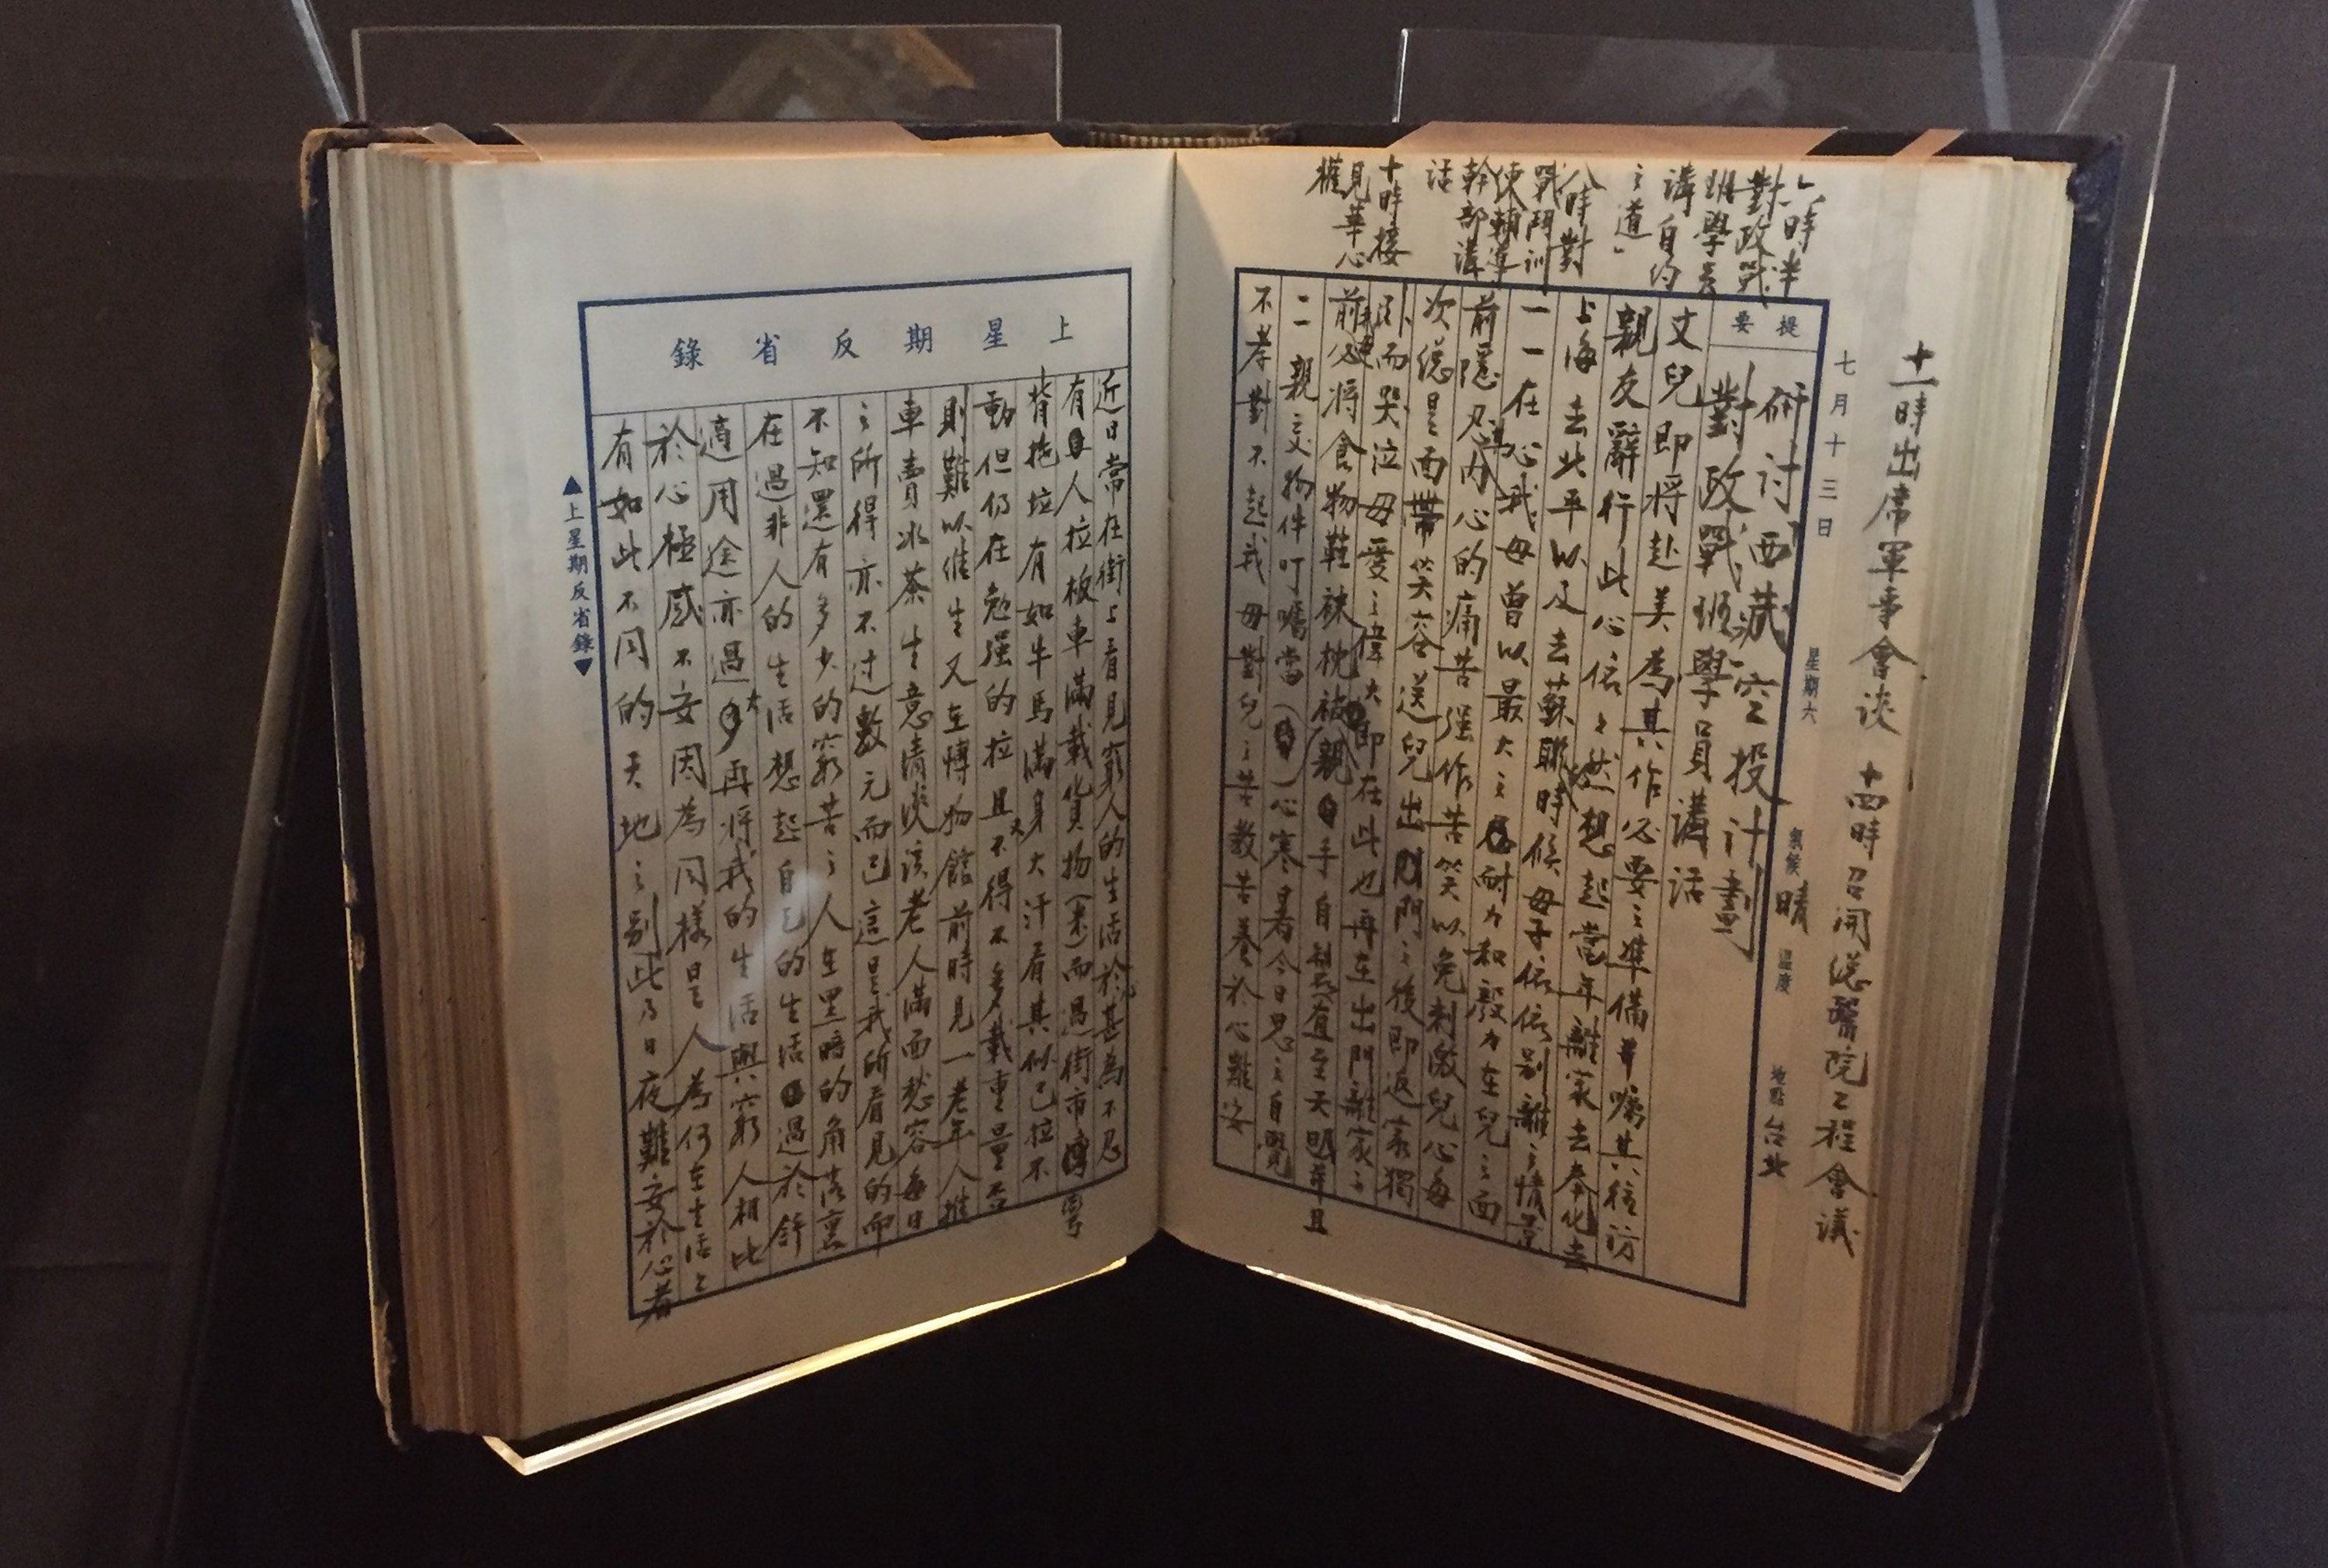 Diaries of Taiwan’s First President To Be Returned After Legal Battle With Stanford